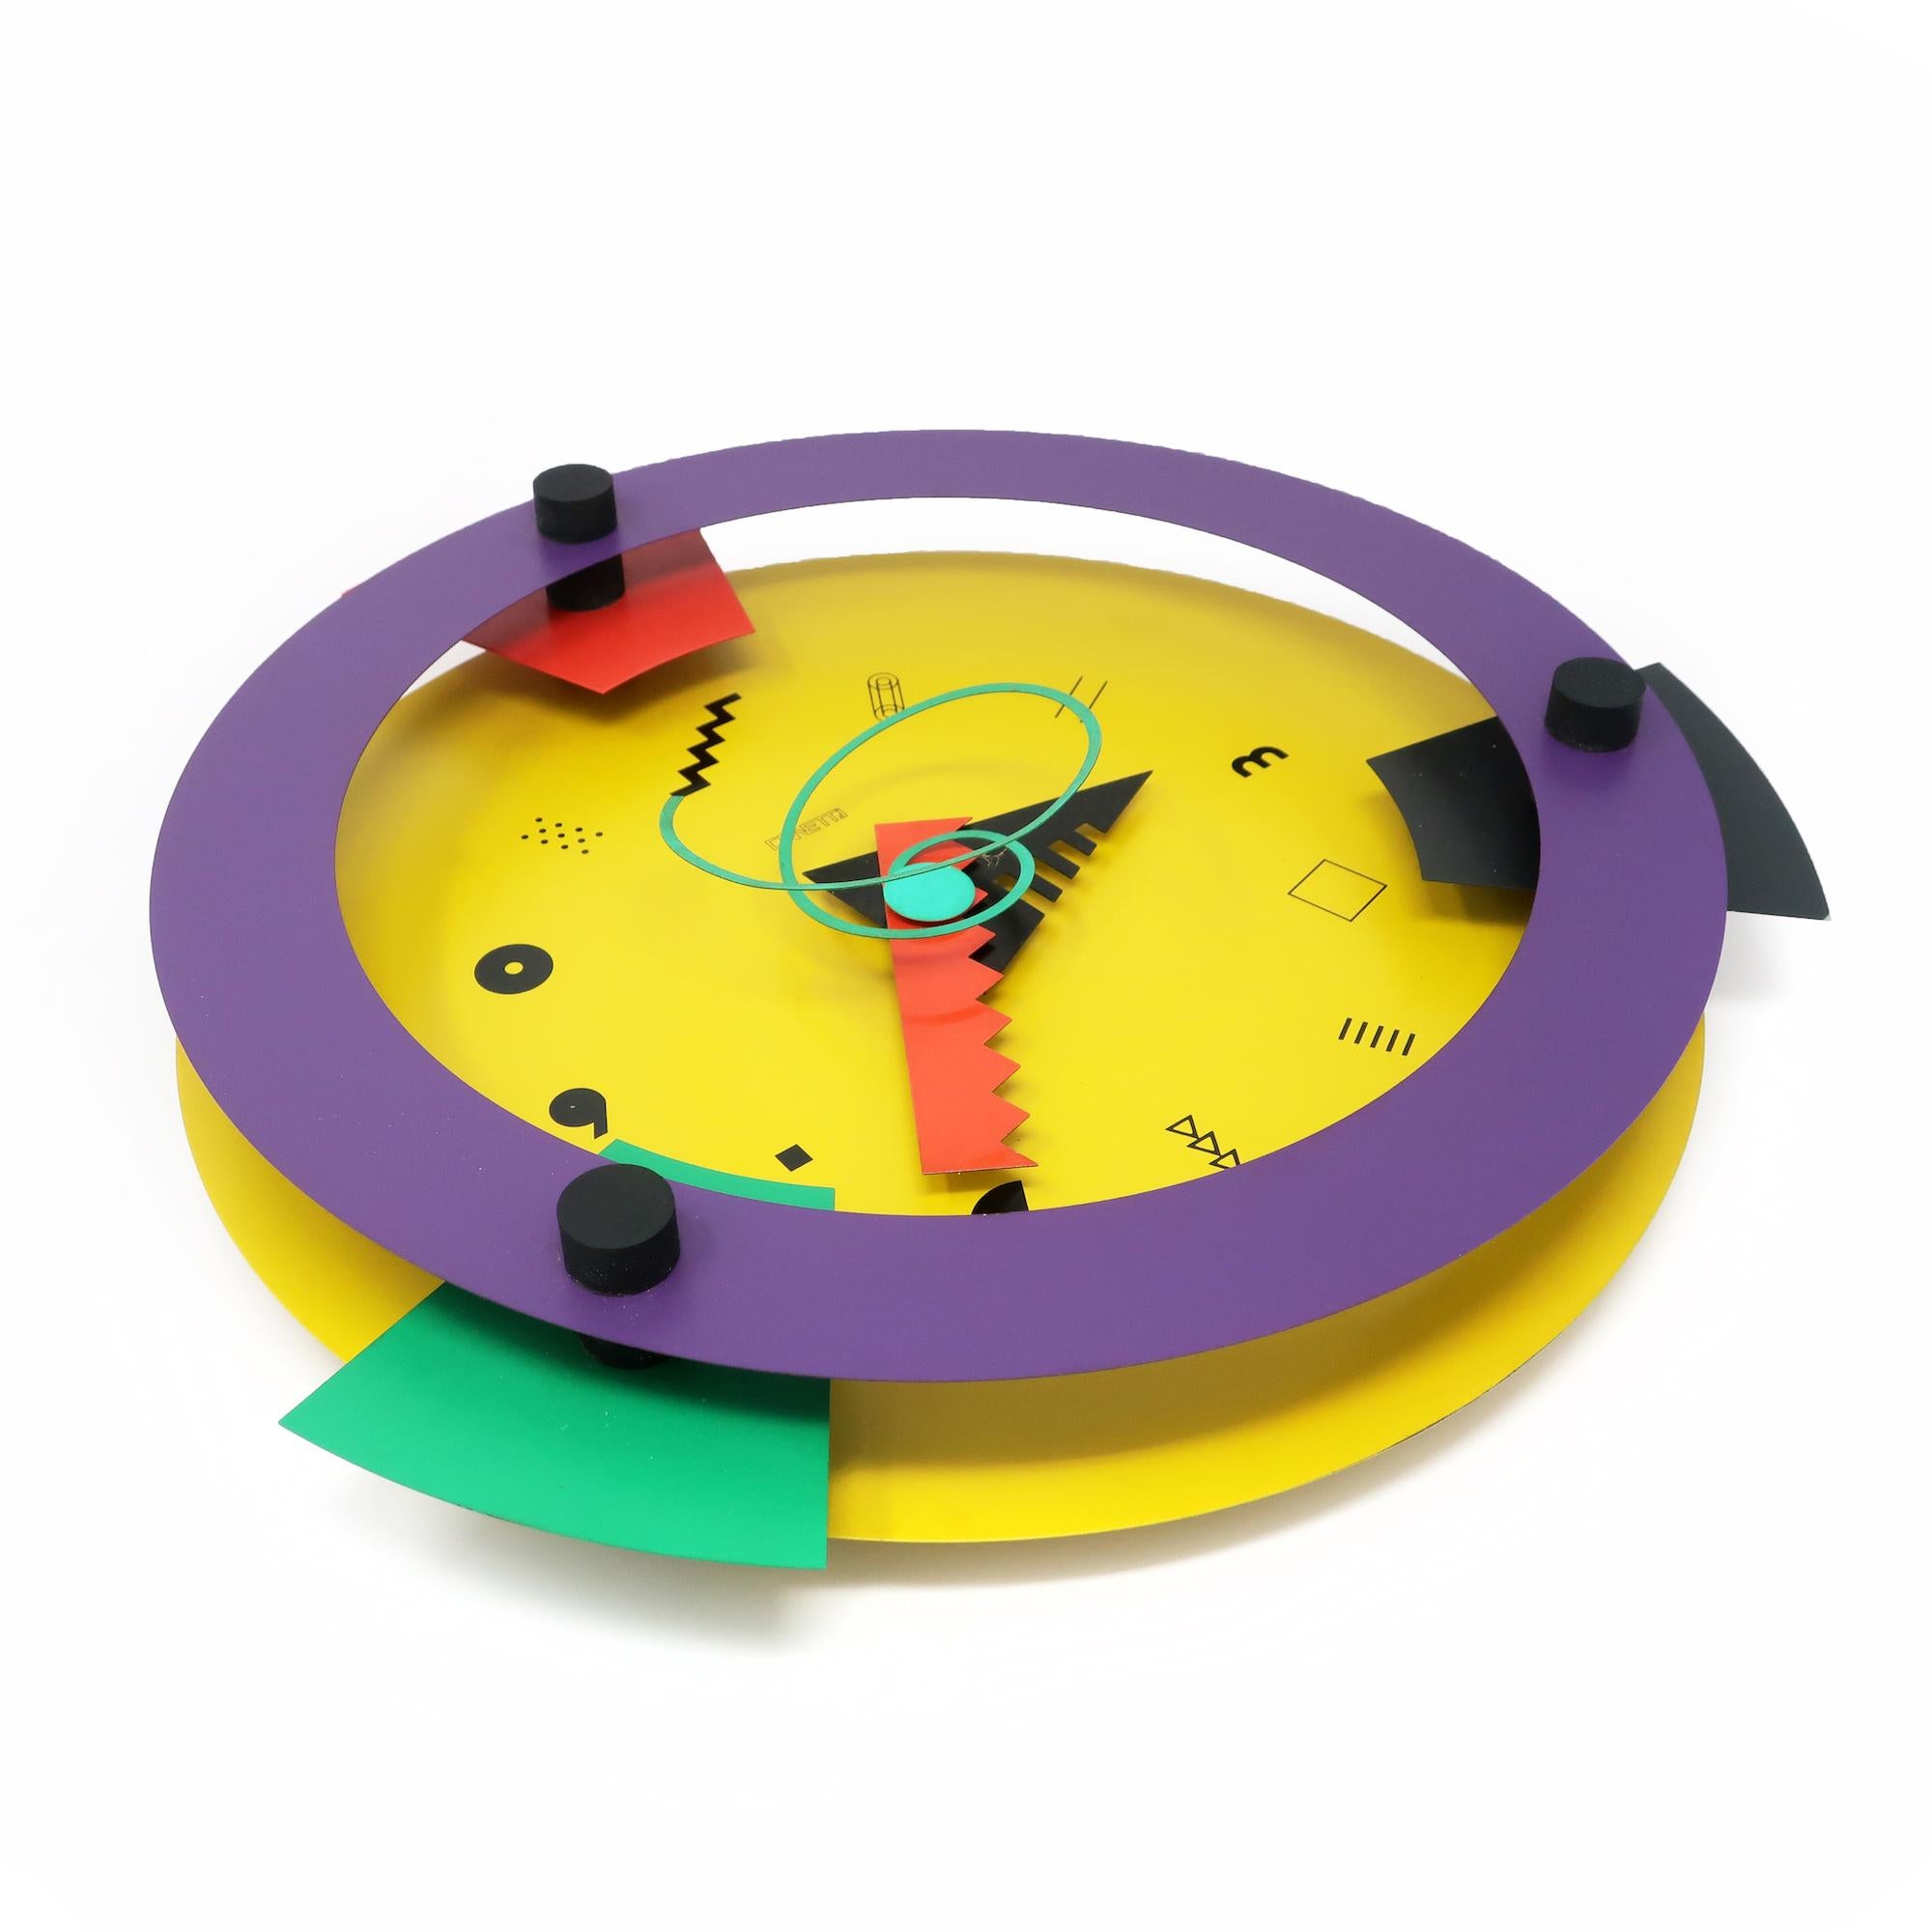 An insanely spectacular postmodern wall clock designed by Shohei Mihara in the 1980s and produced by Wakita and Canetti.  Capturing the best of Memphis Milano's influence on 1980s design, this clock has a round face, geometric accents, a fantastic